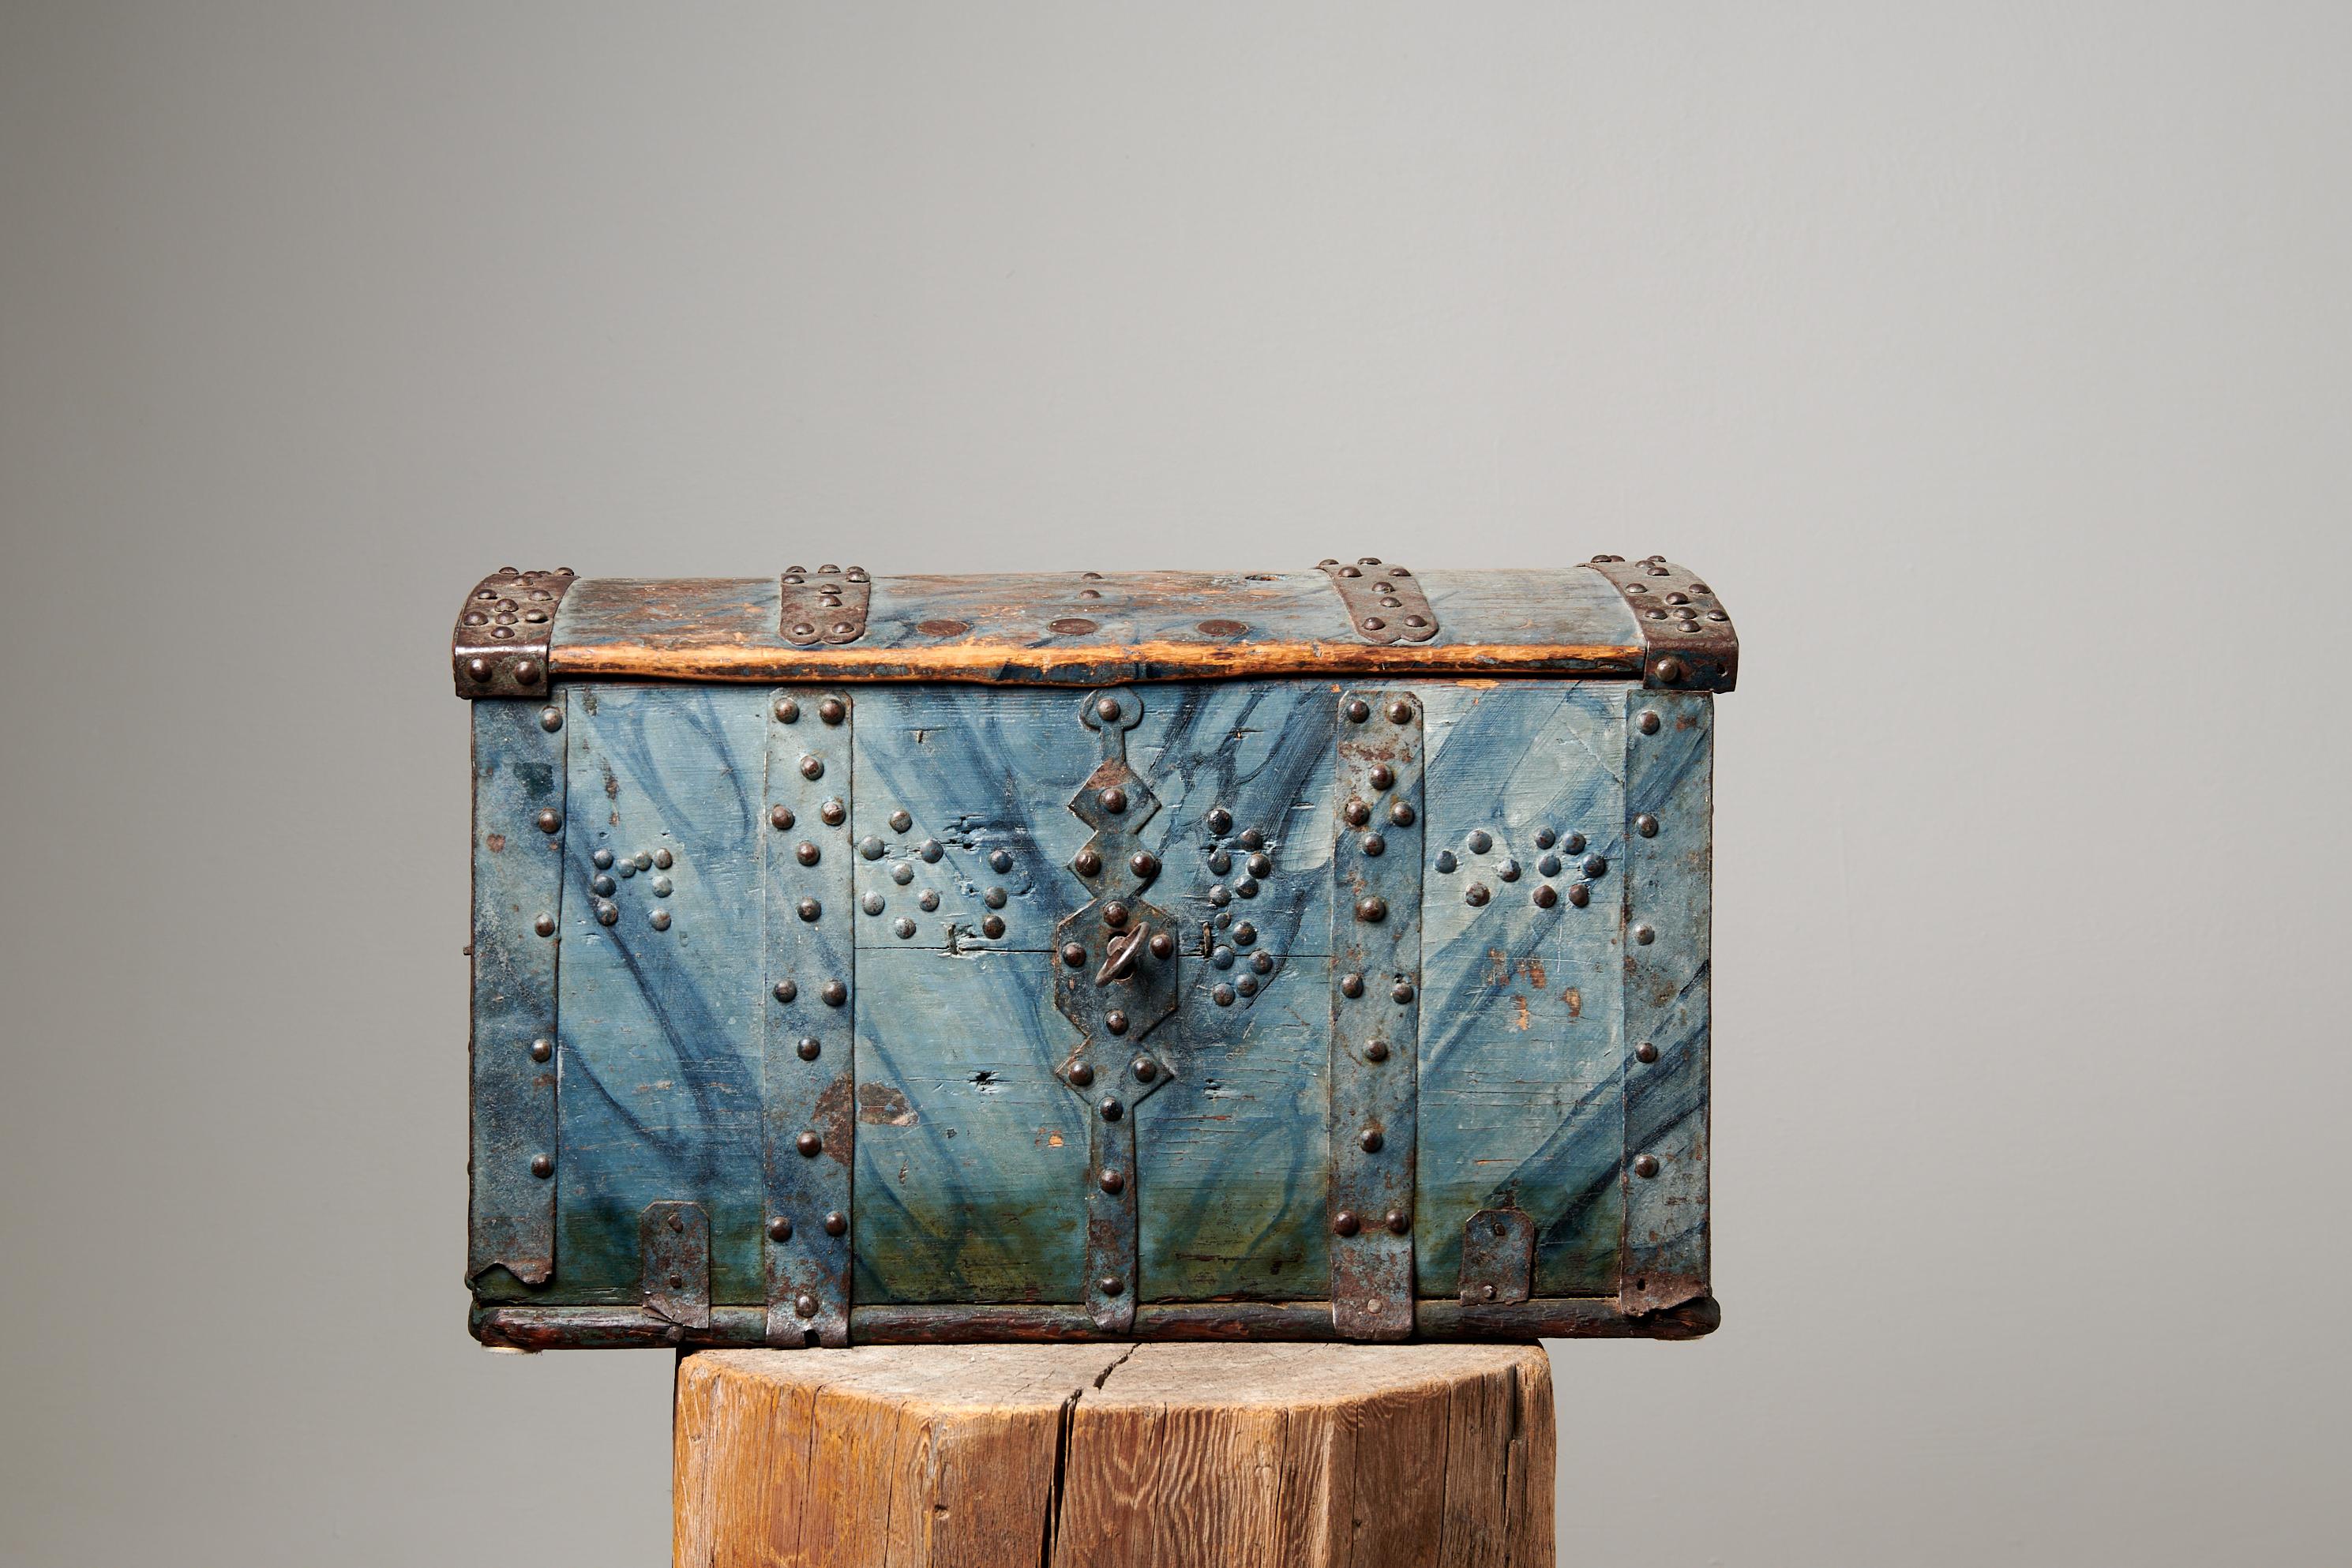 Antique blue marbled chest from northern Sweden made during the late 1700s. The chest is very unusual and in untouched original condition. Made in pine with working lock and key. The chest has plenty of handwrought iron reinforcements which